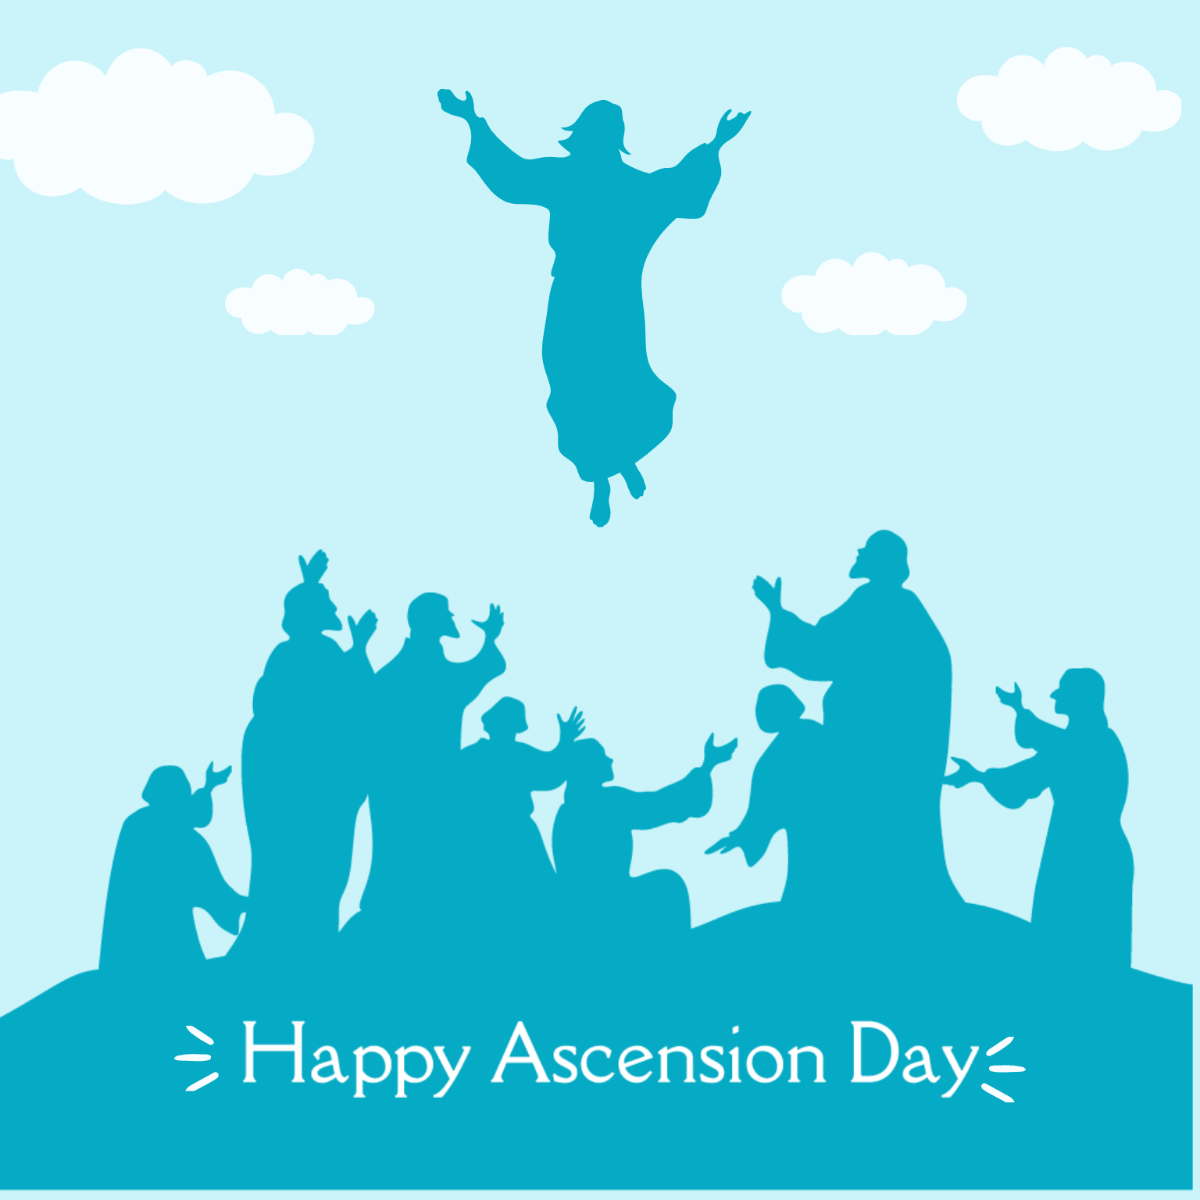 Free Ascension Day Celebration Vector Template